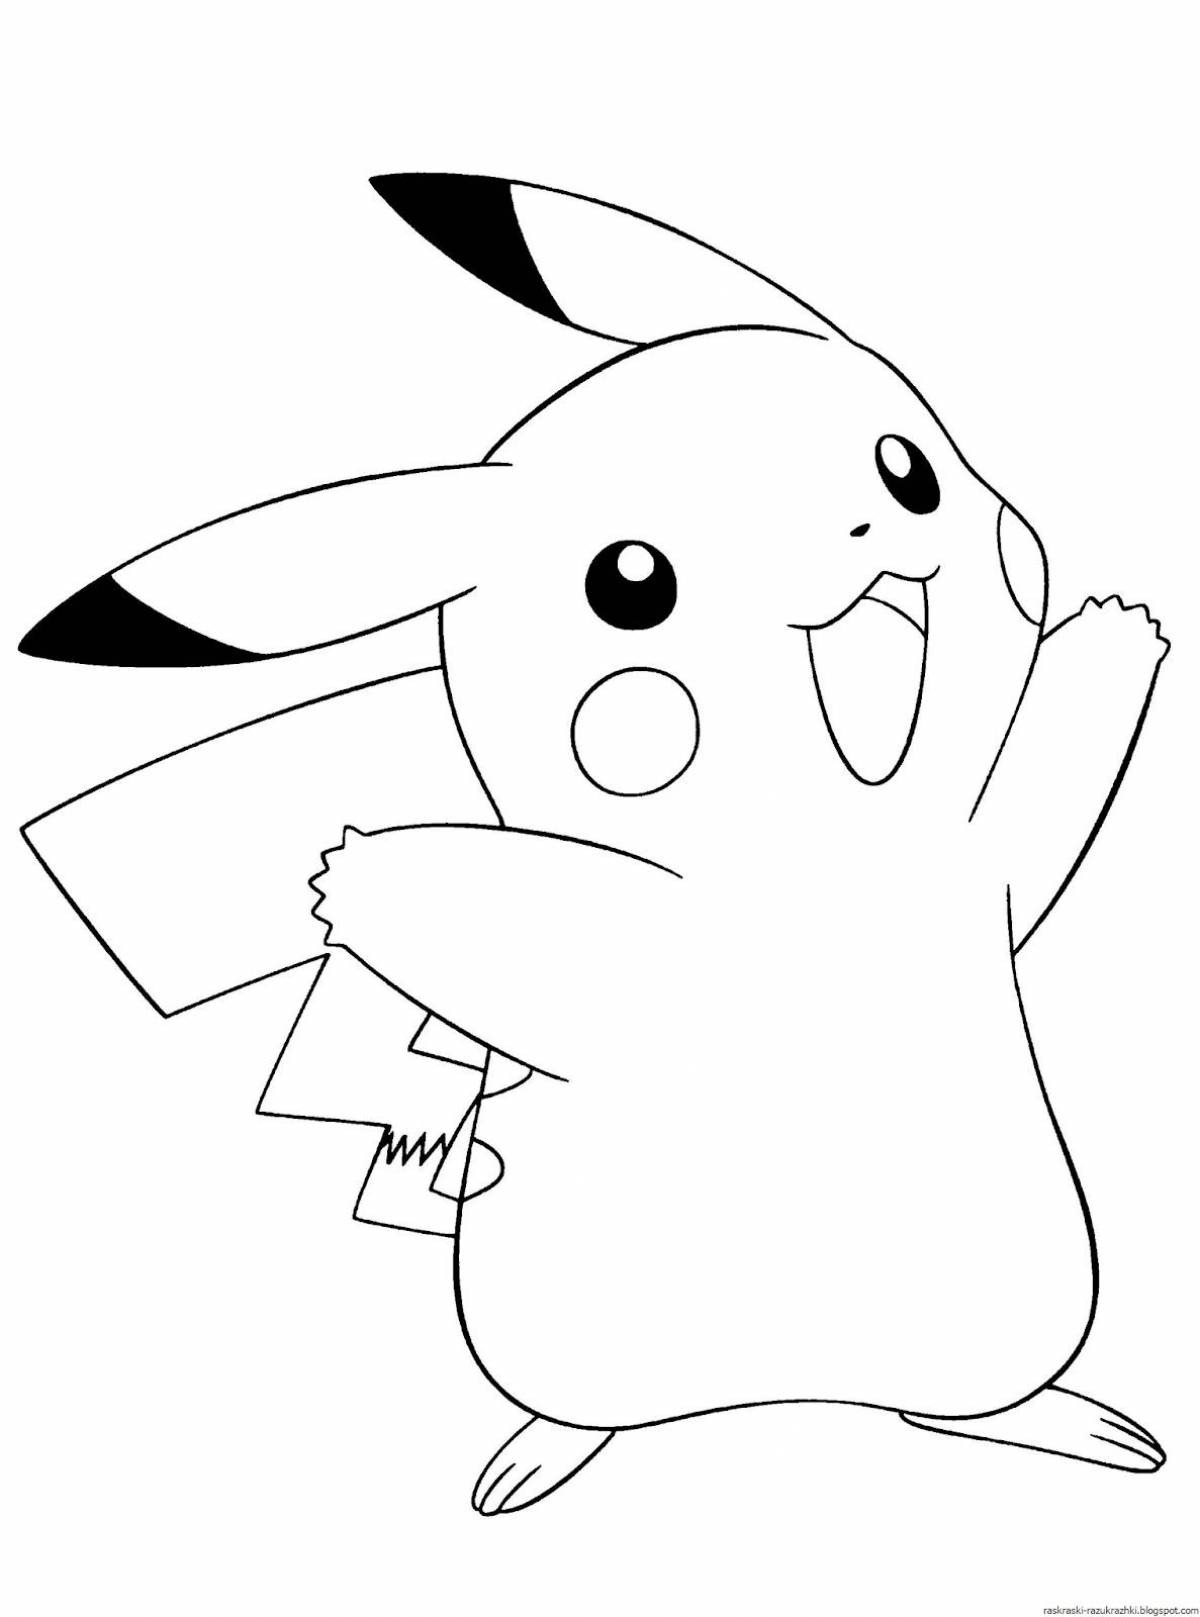 Awesome pikachu coloring page